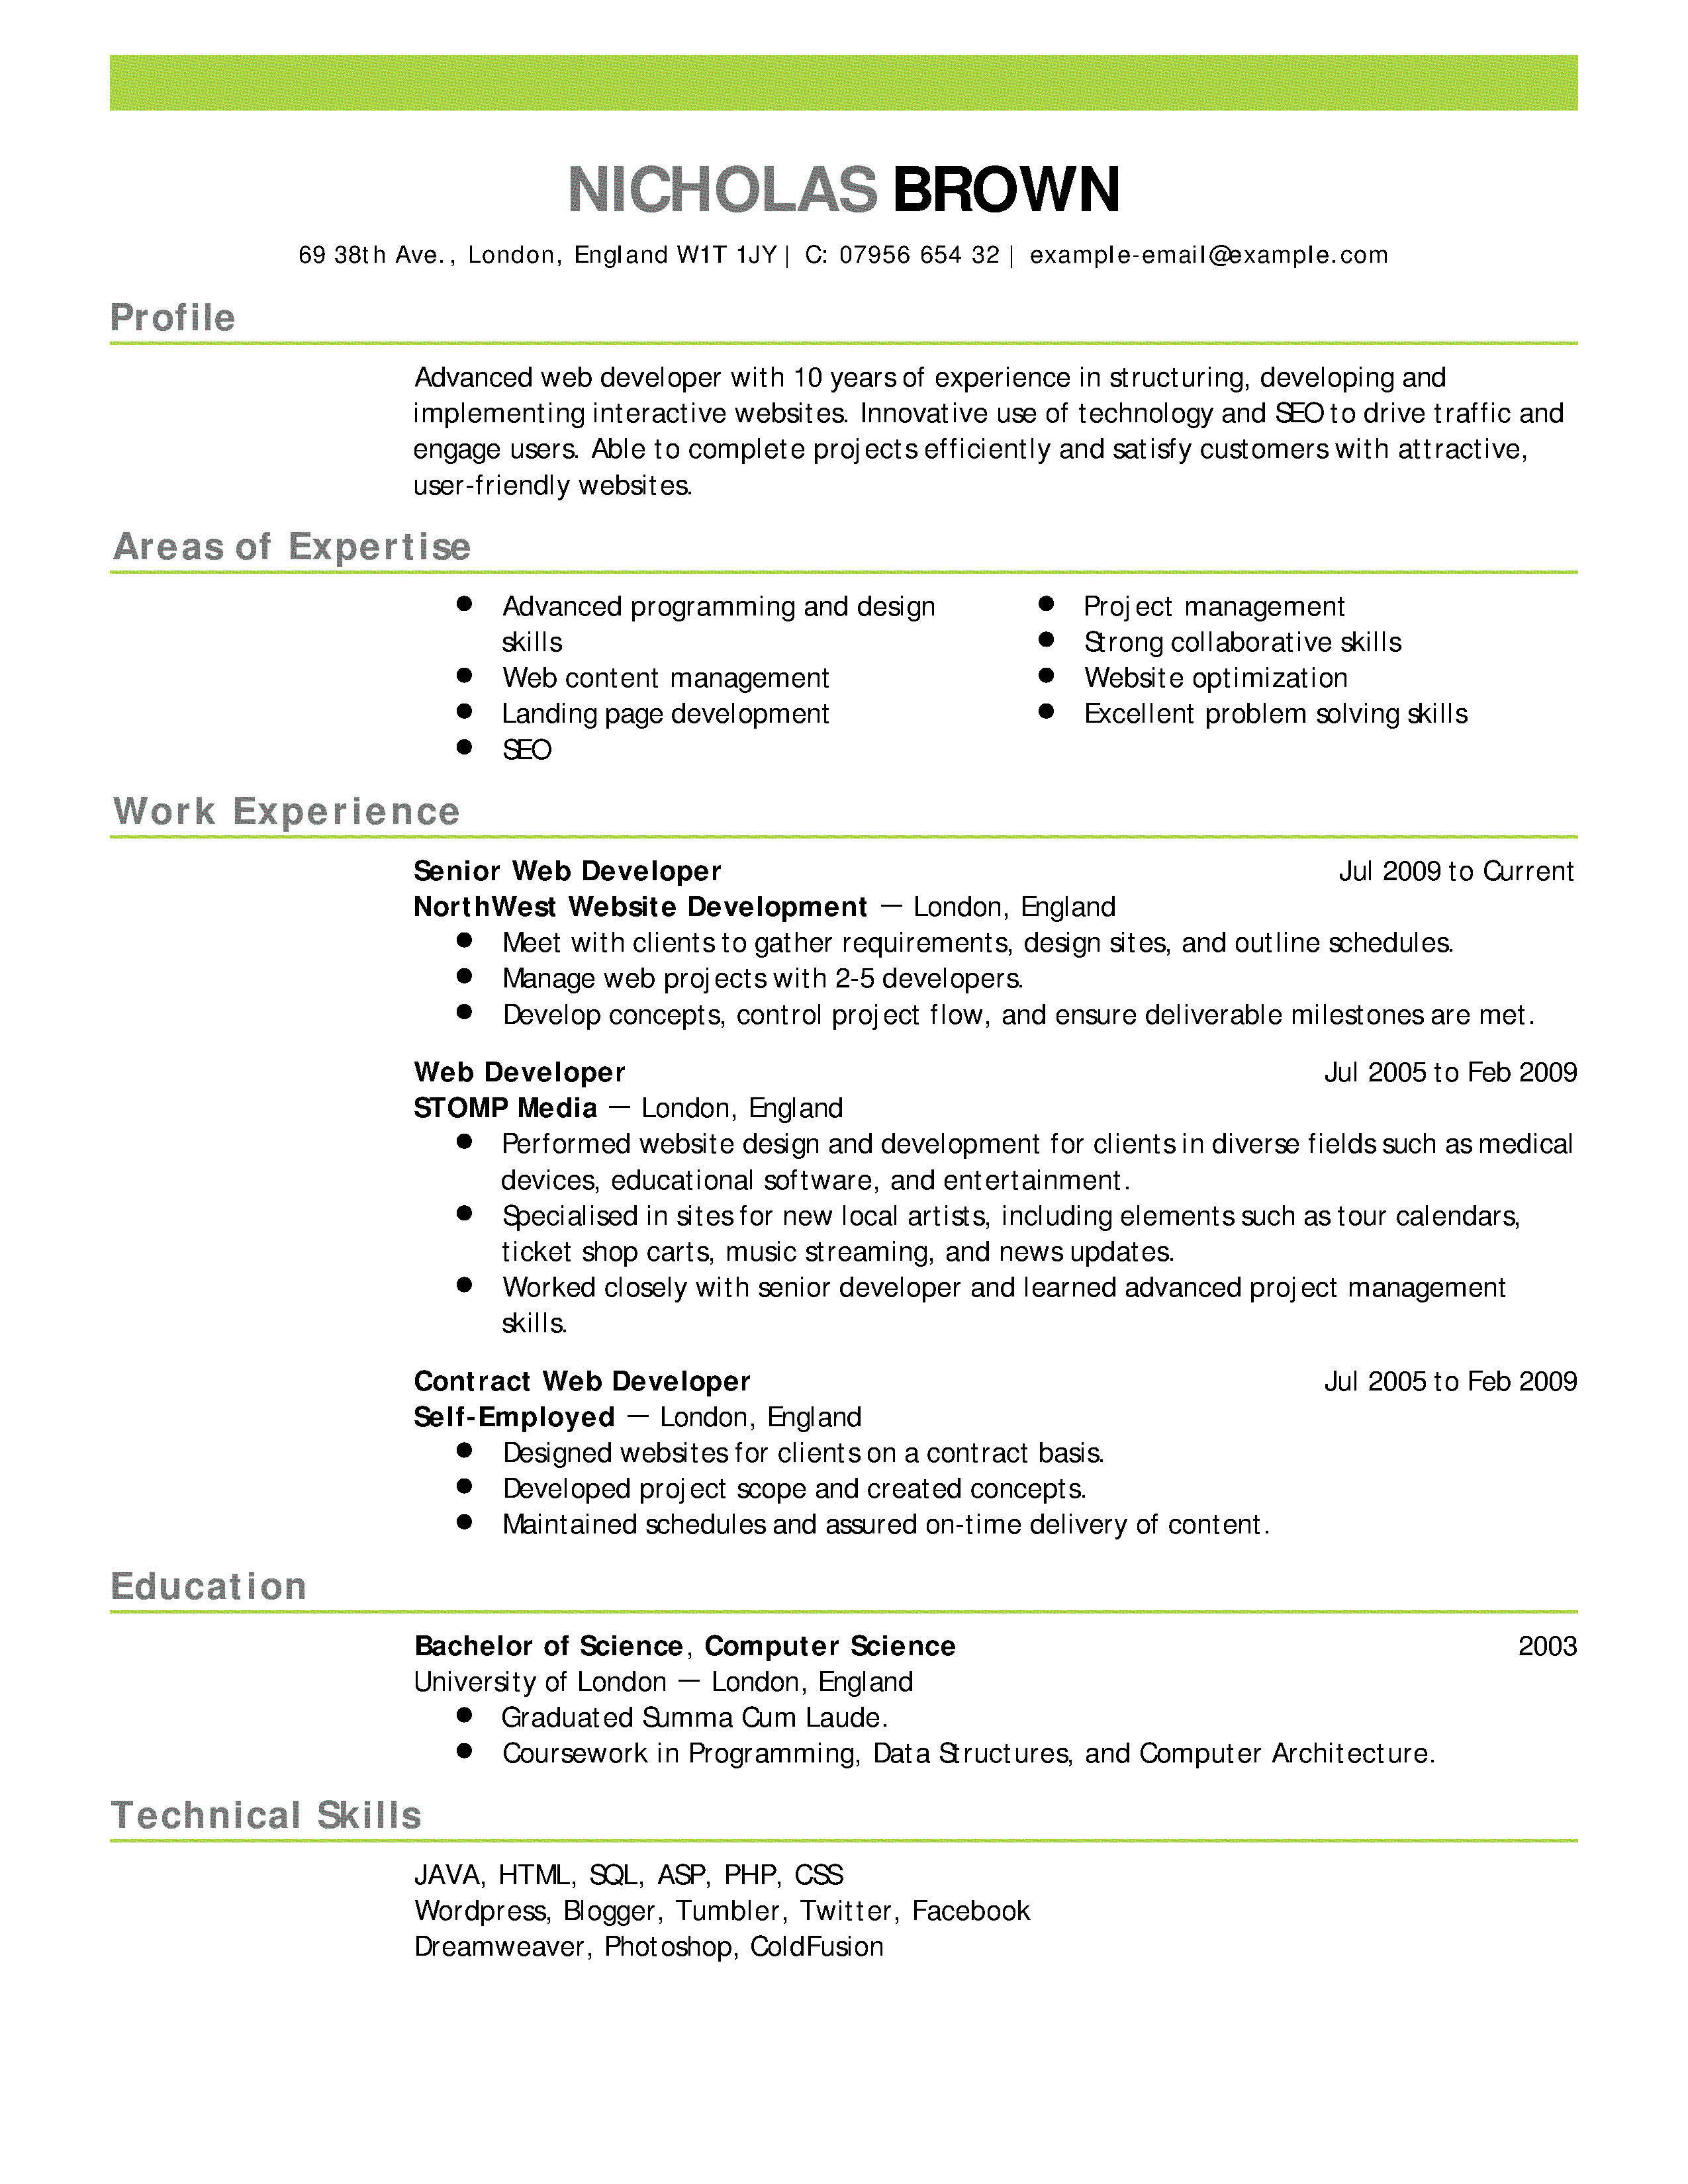 Free Template for Resume 16 Free Resume Templates Excel Pdf formats